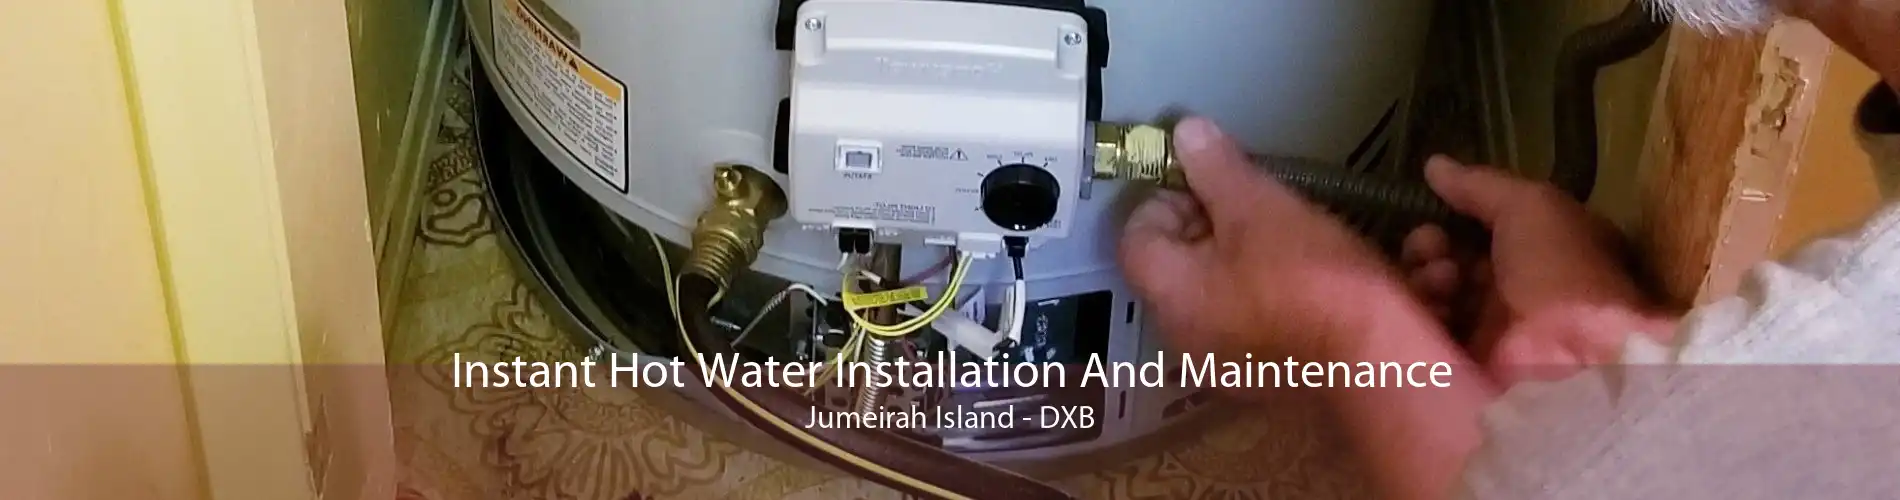 Instant Hot Water Installation And Maintenance Jumeirah Island - DXB